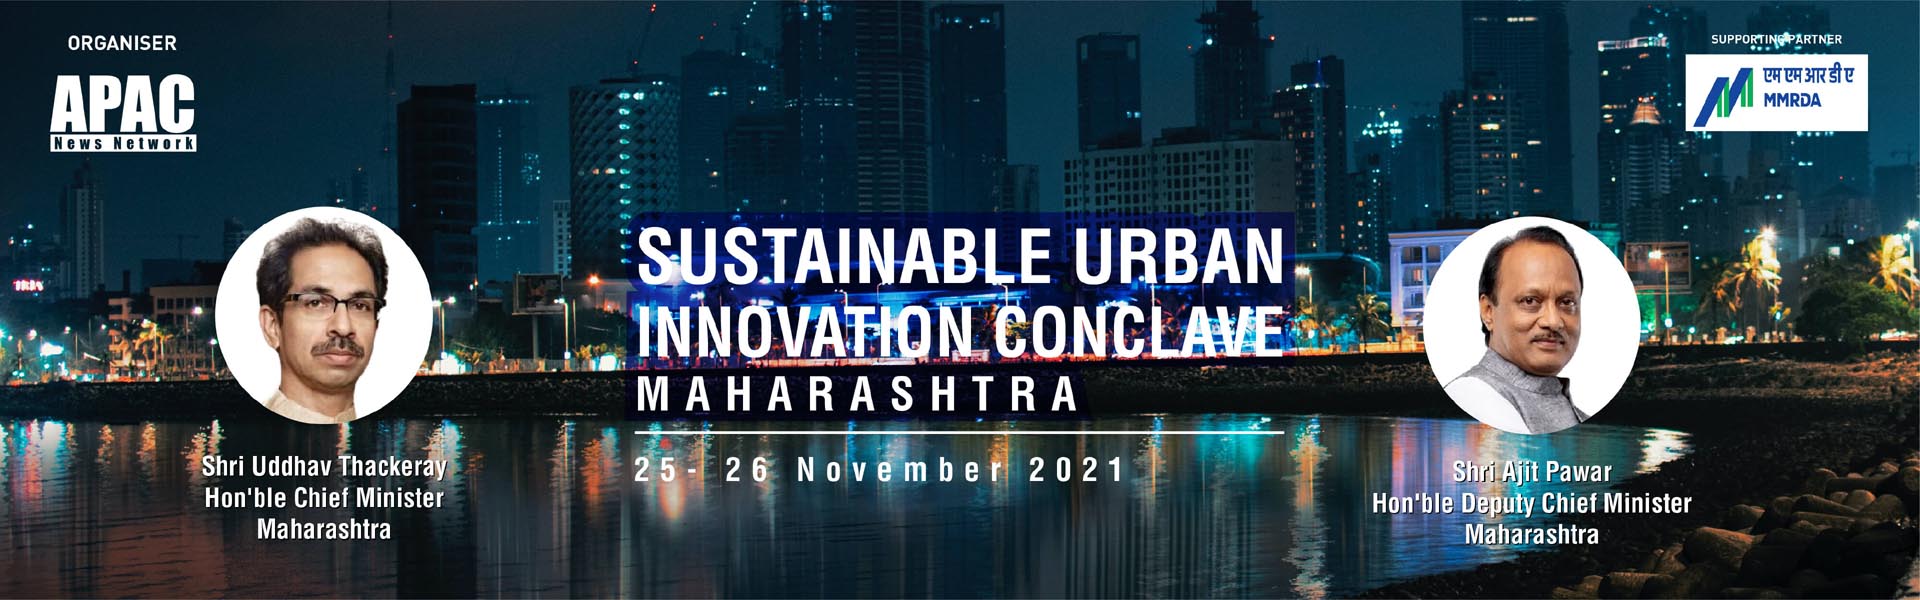 APAC Sustainable Urban Innovation Conclave